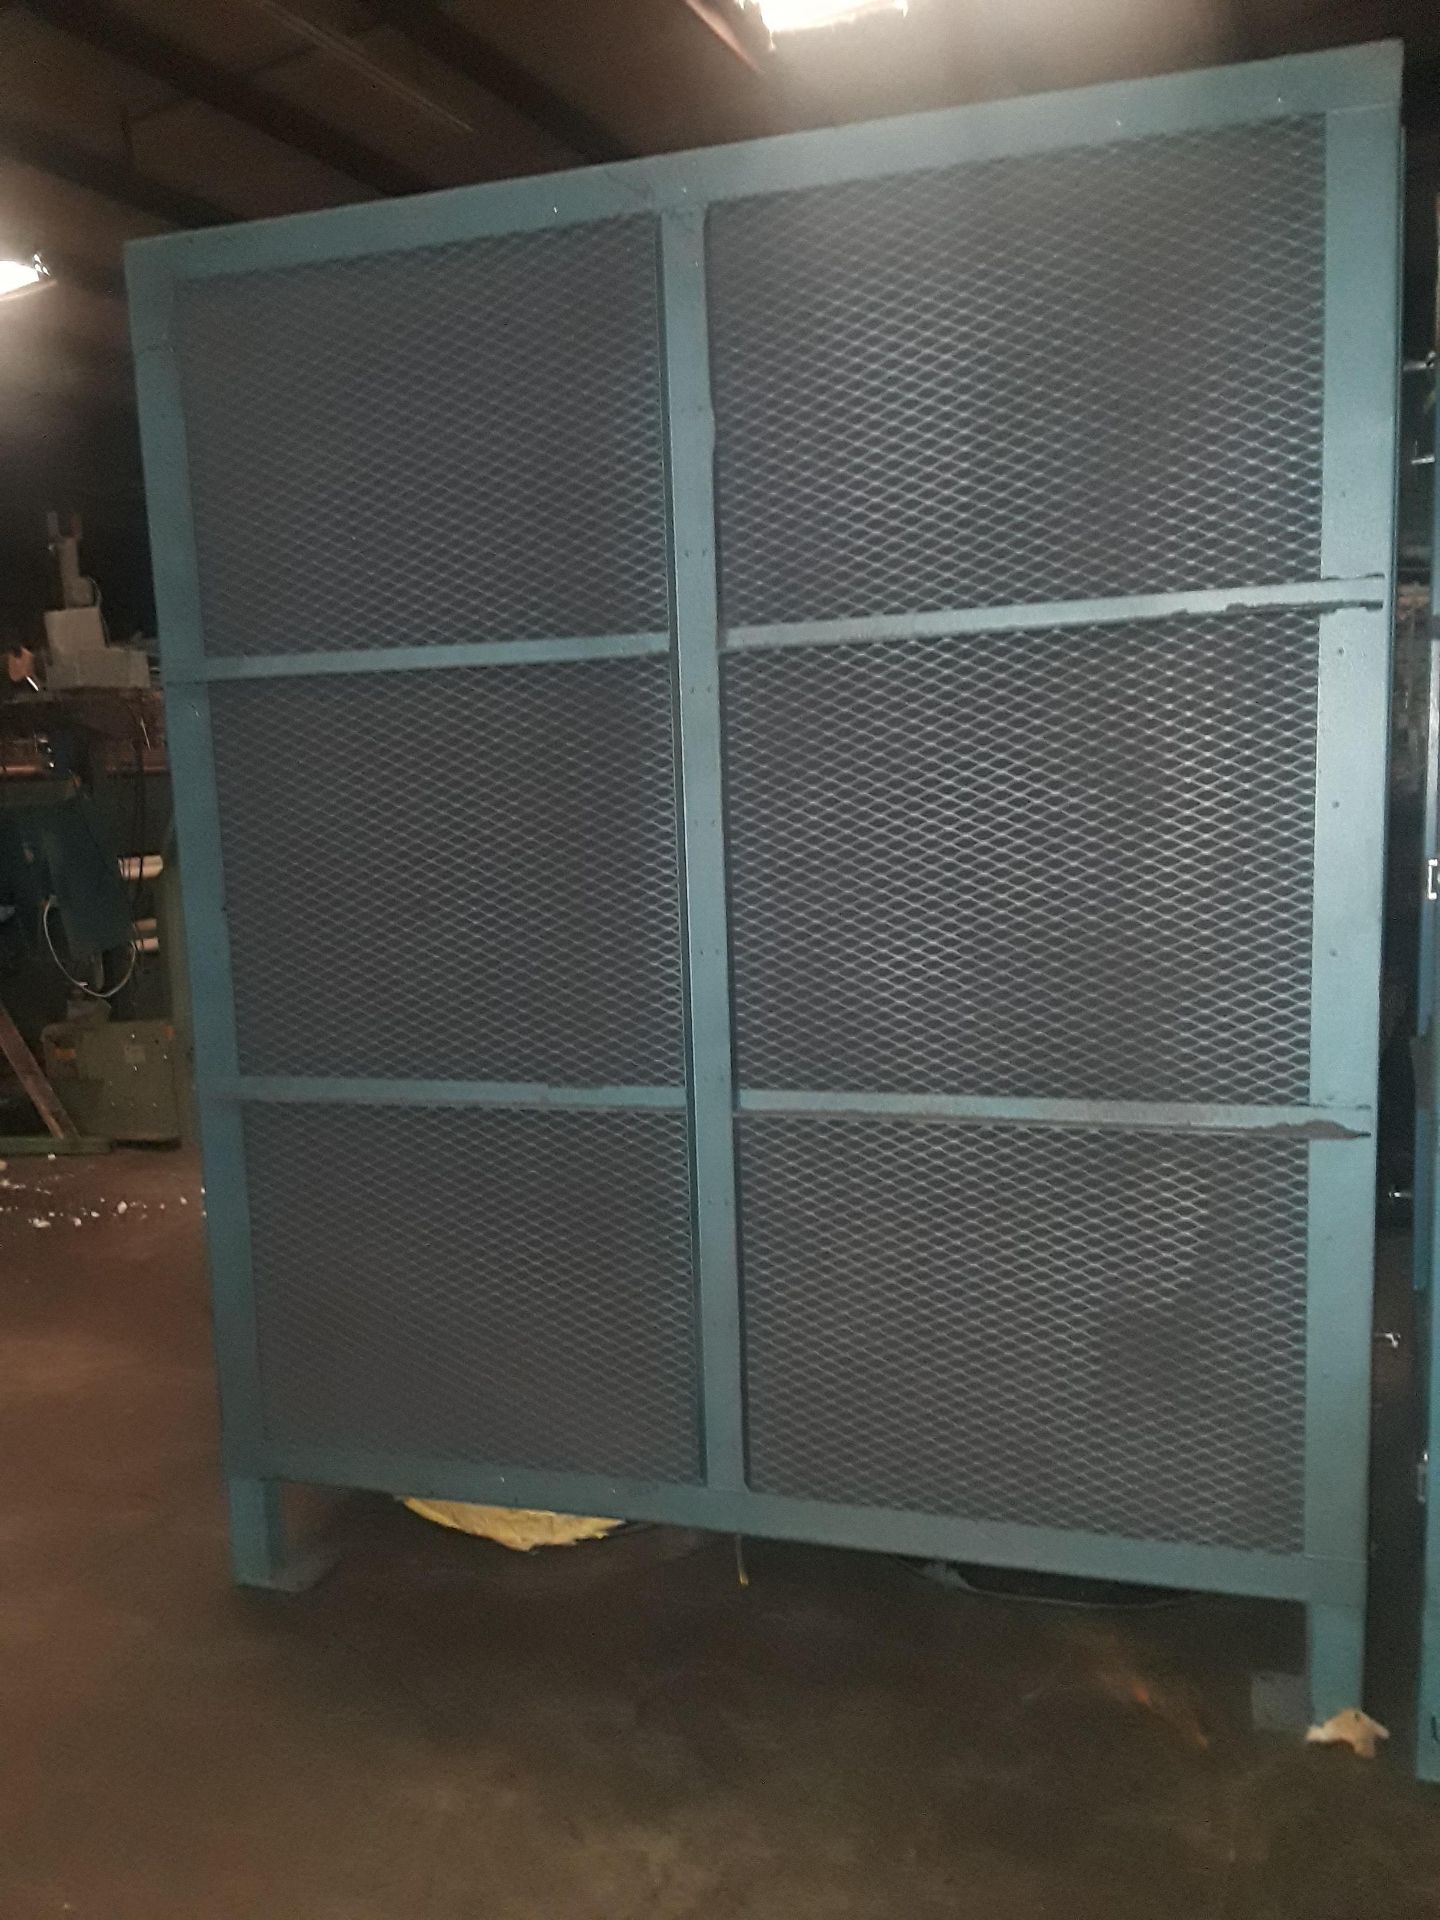 Osprey 2 Bag Filter house, 114" X 42" X 92", Rigging Fee For This Item Is $50